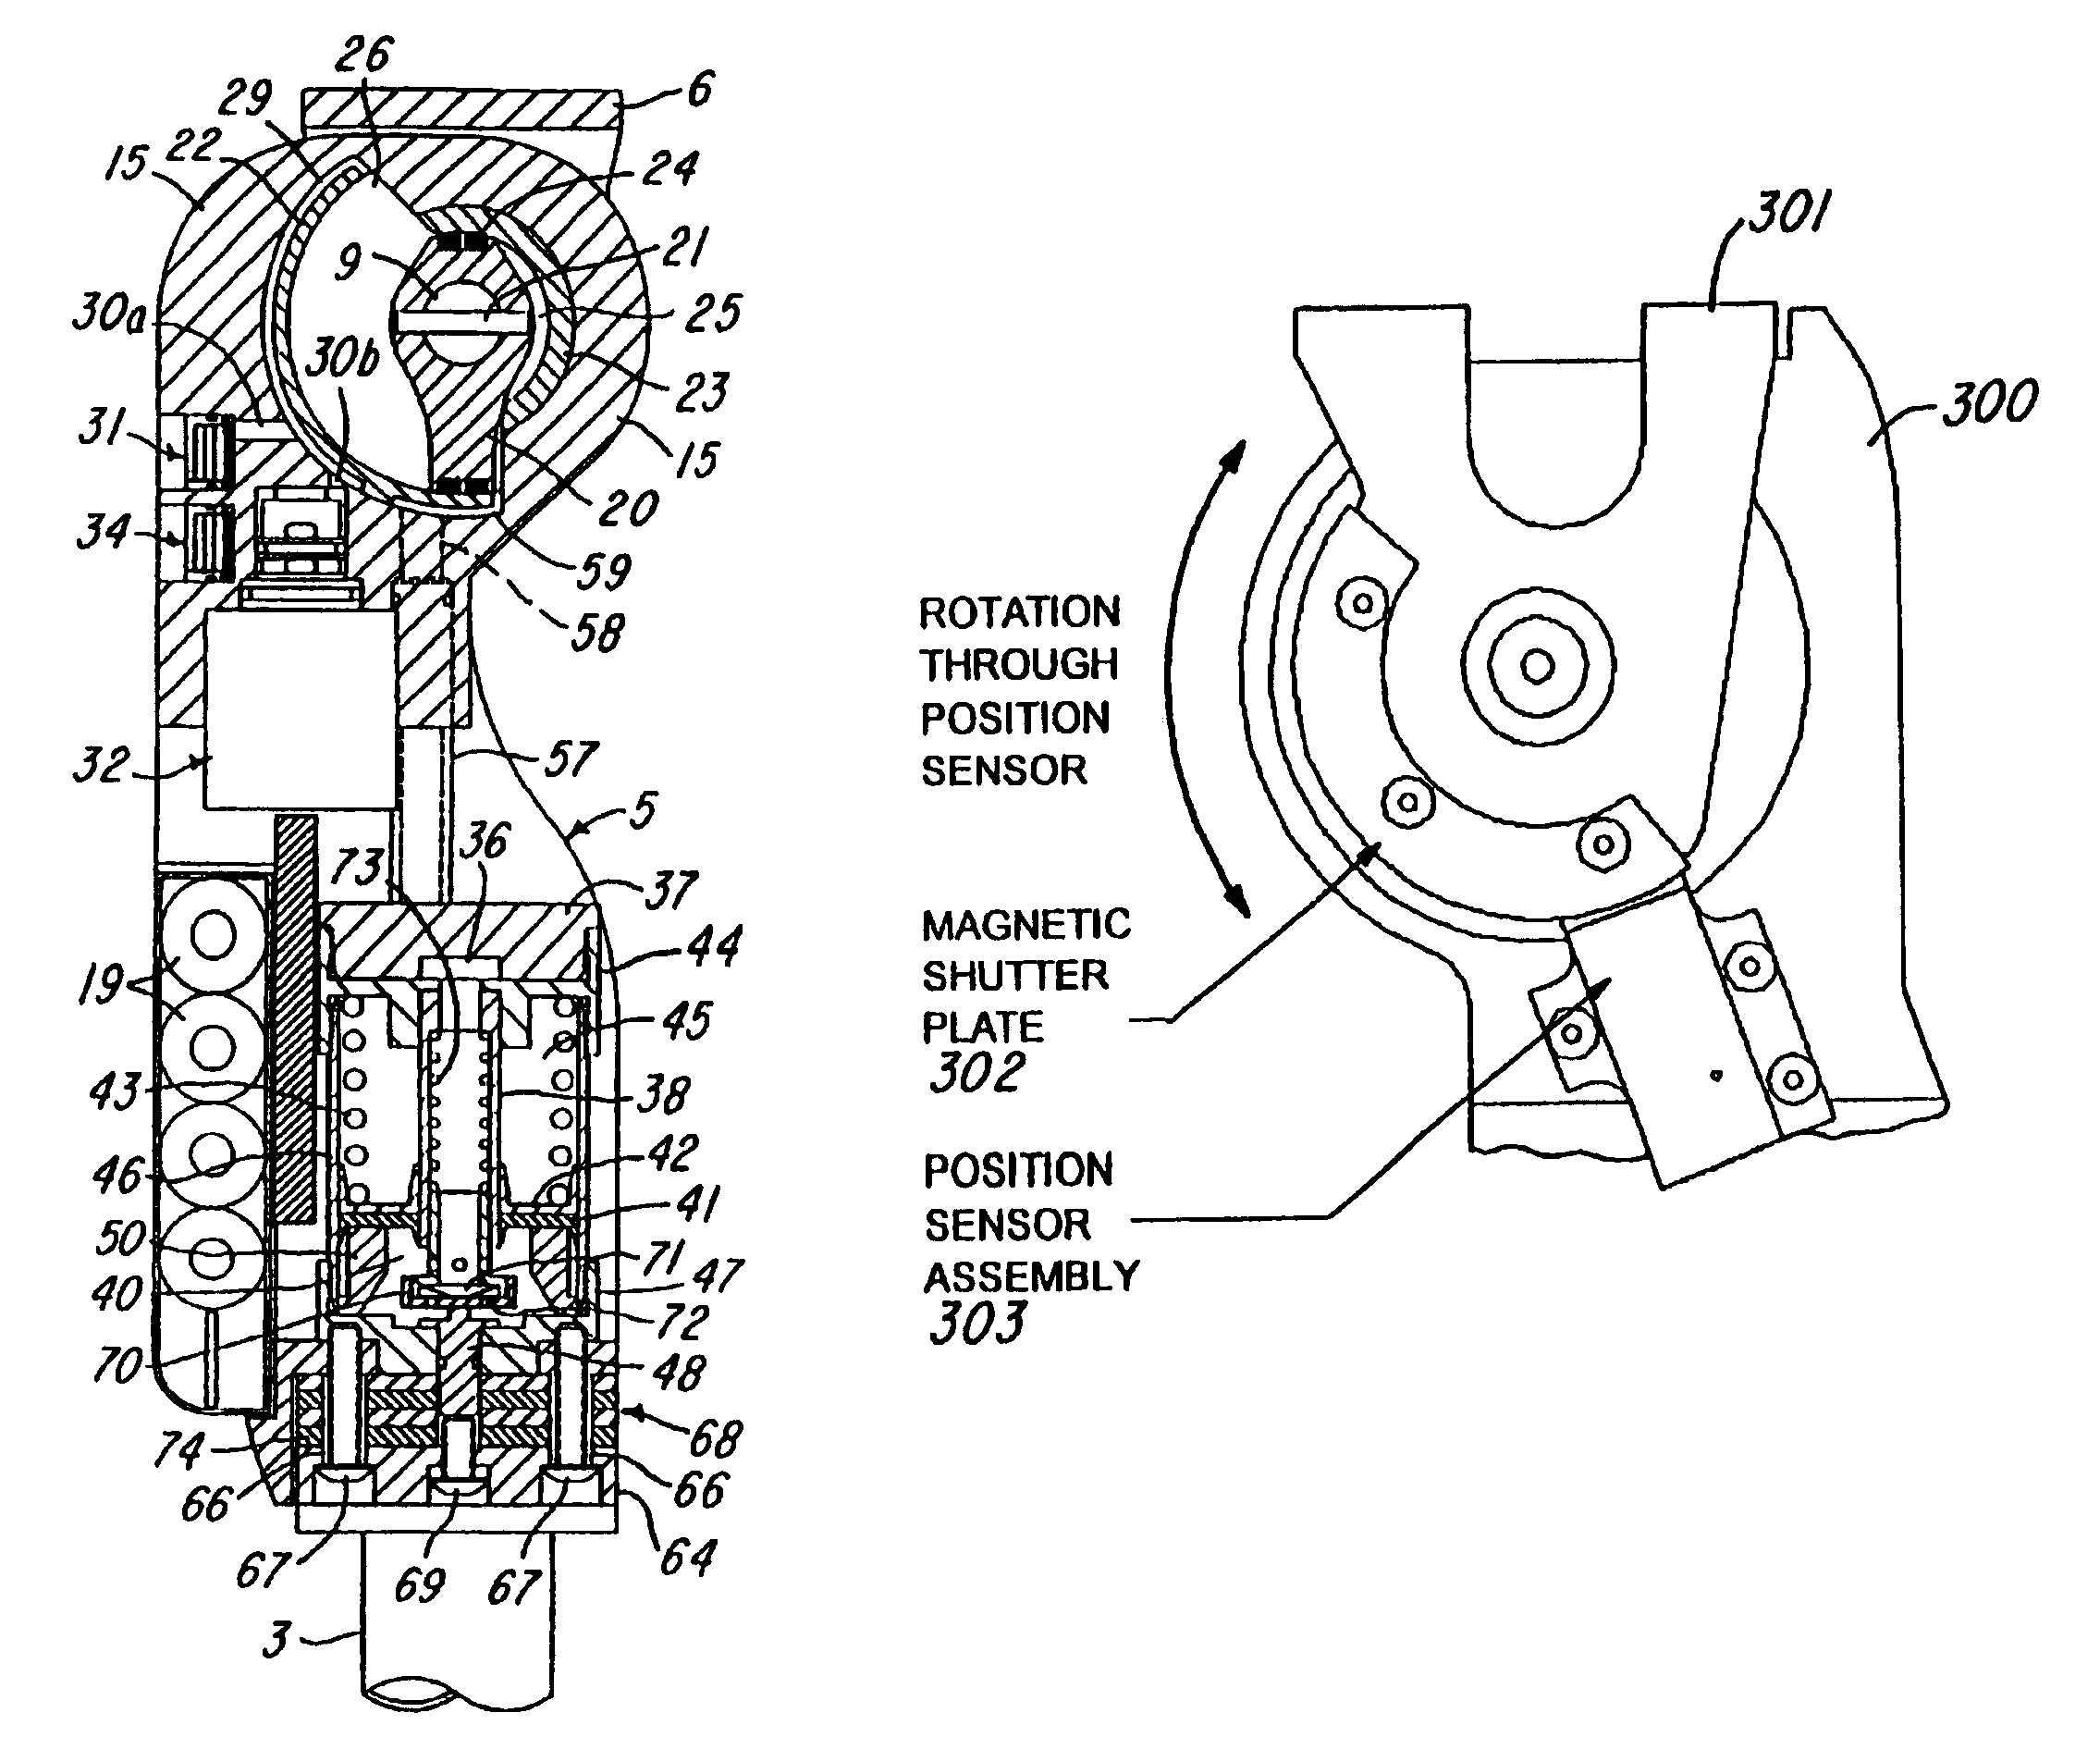 Computer controlled hydraulic resistance device for a prosthesis and other apparatus